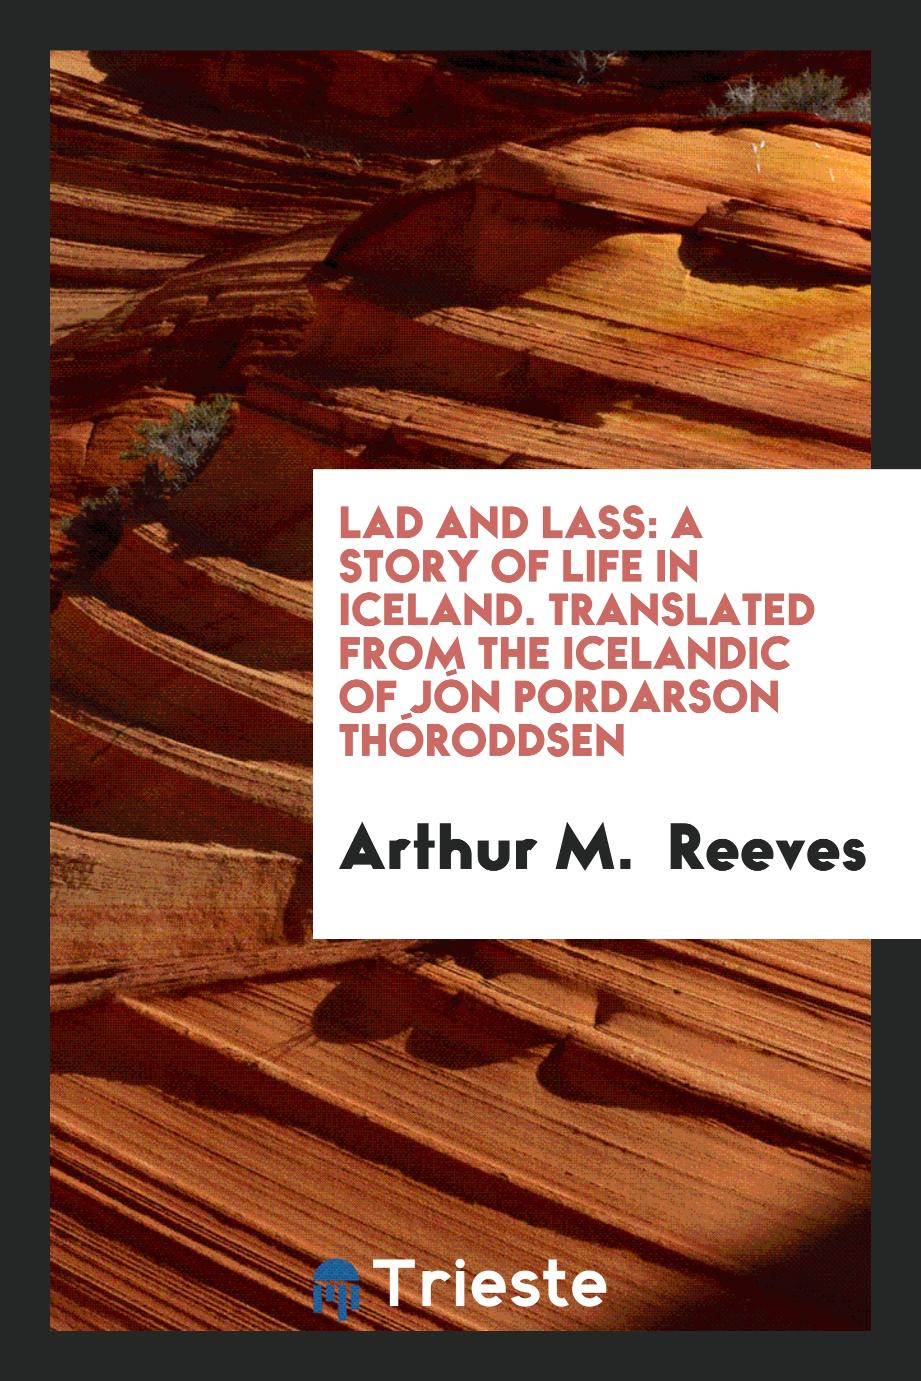 Lad and Lass: A Story of Life in Iceland. Translated from the Icelandic of Jón Pordarson Thóroddsen